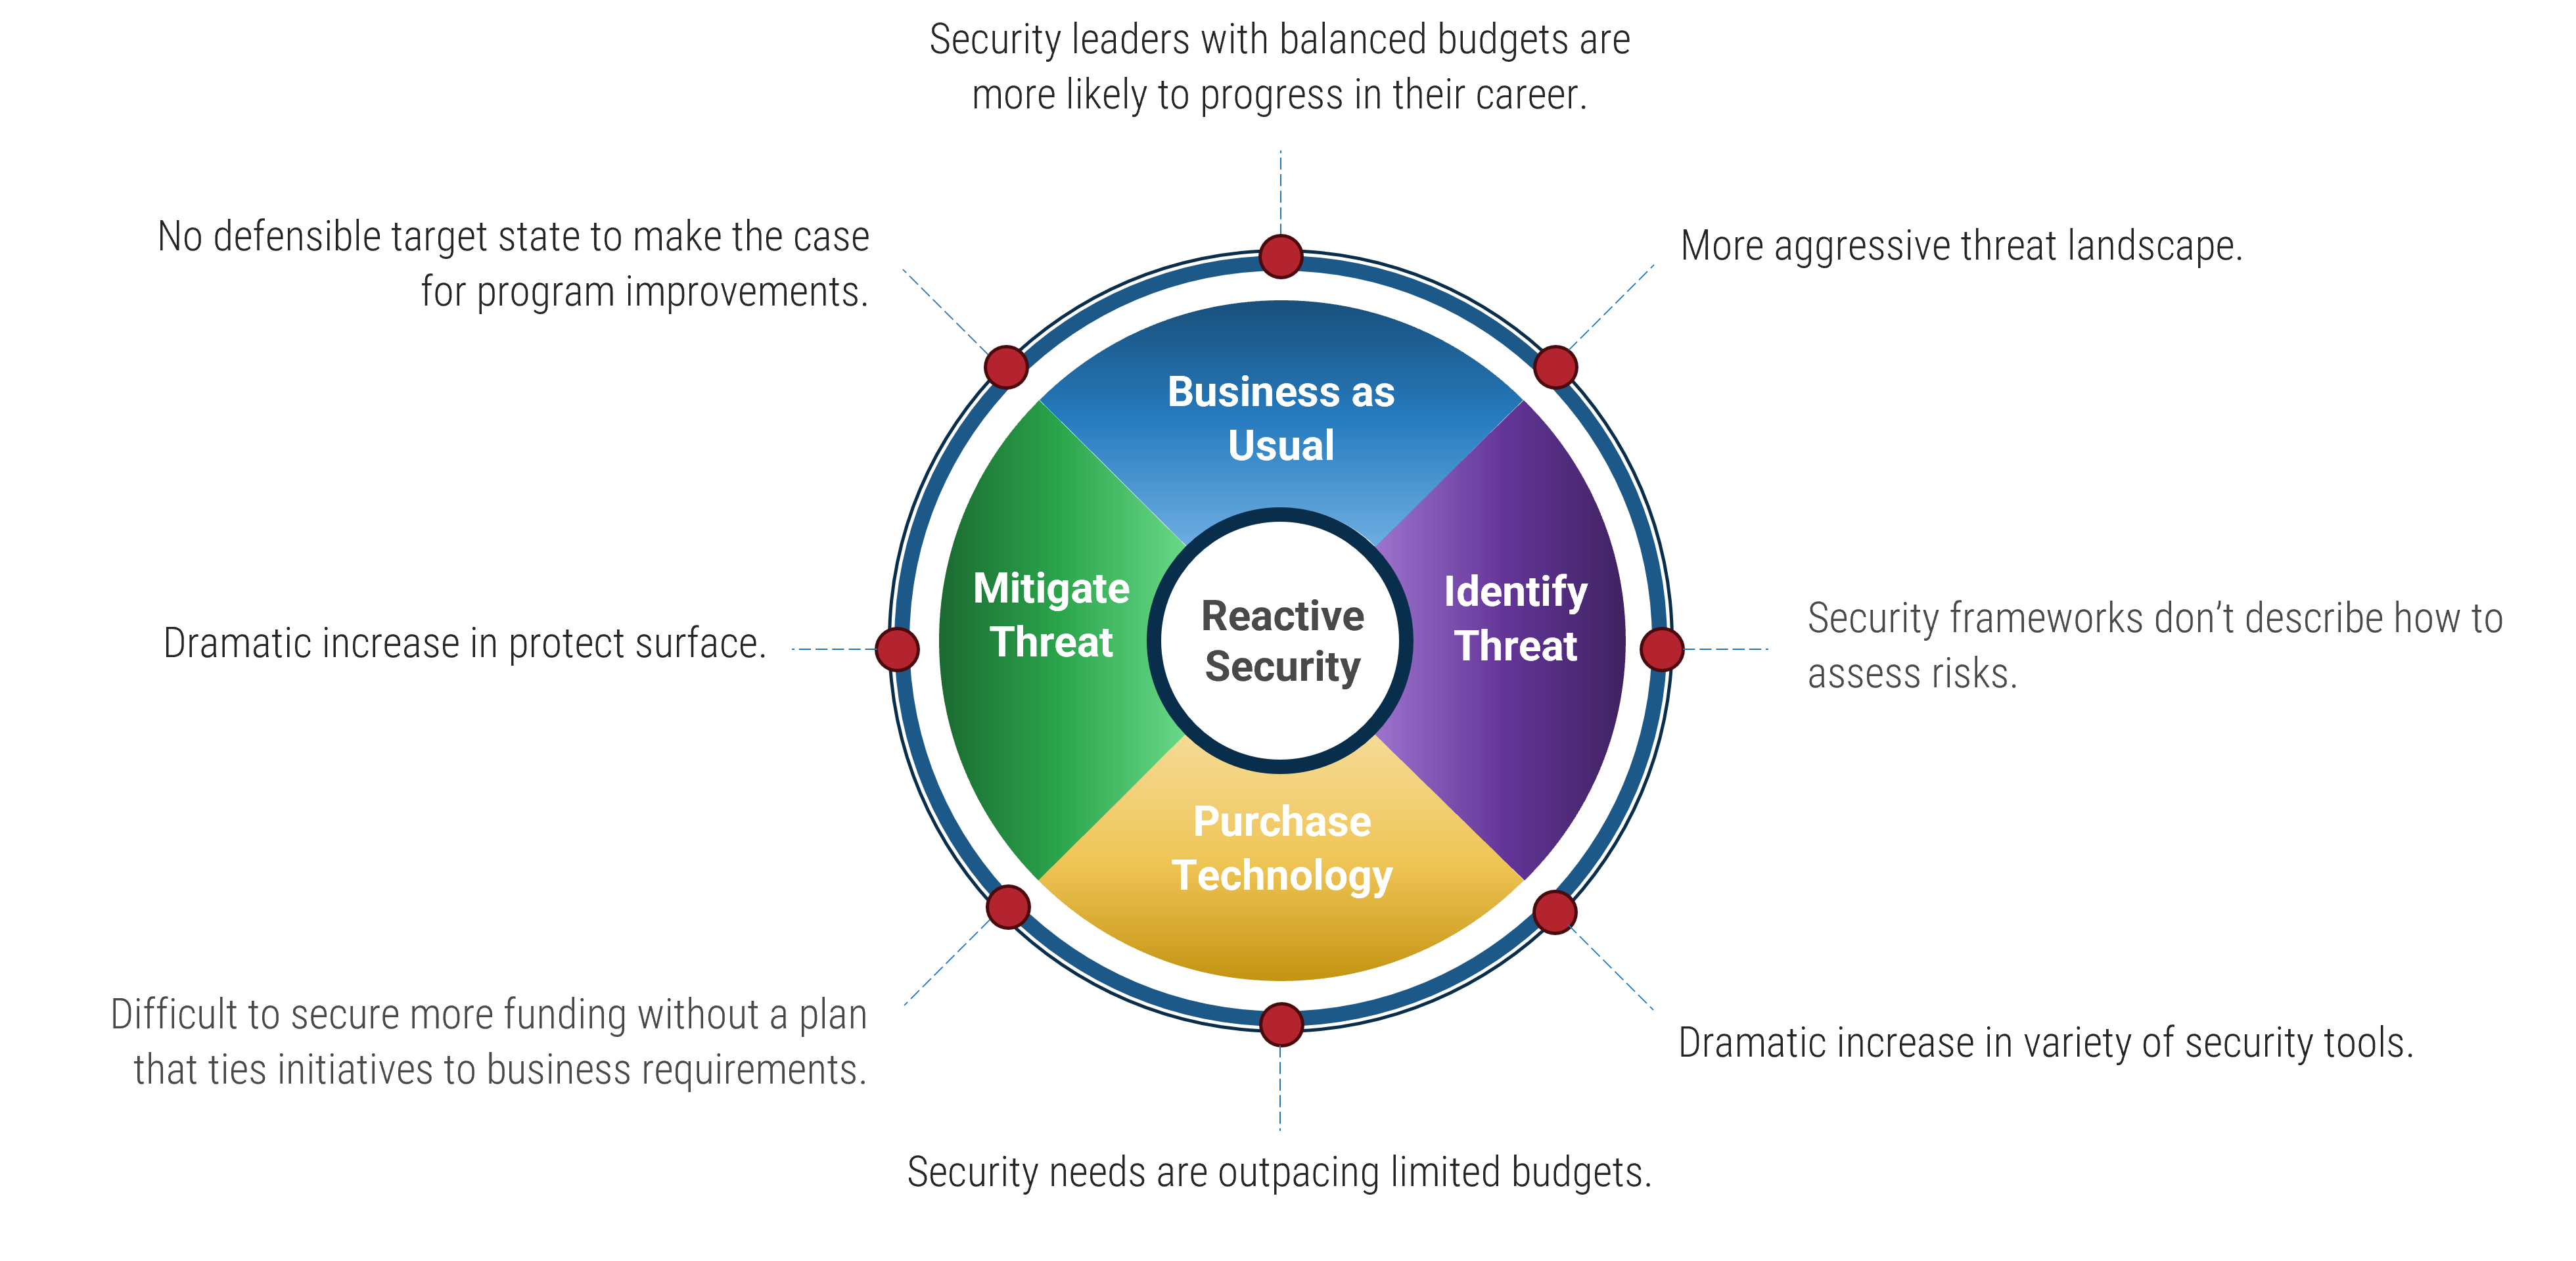 The image contains a screenshot of the common obstacles of reactive security.